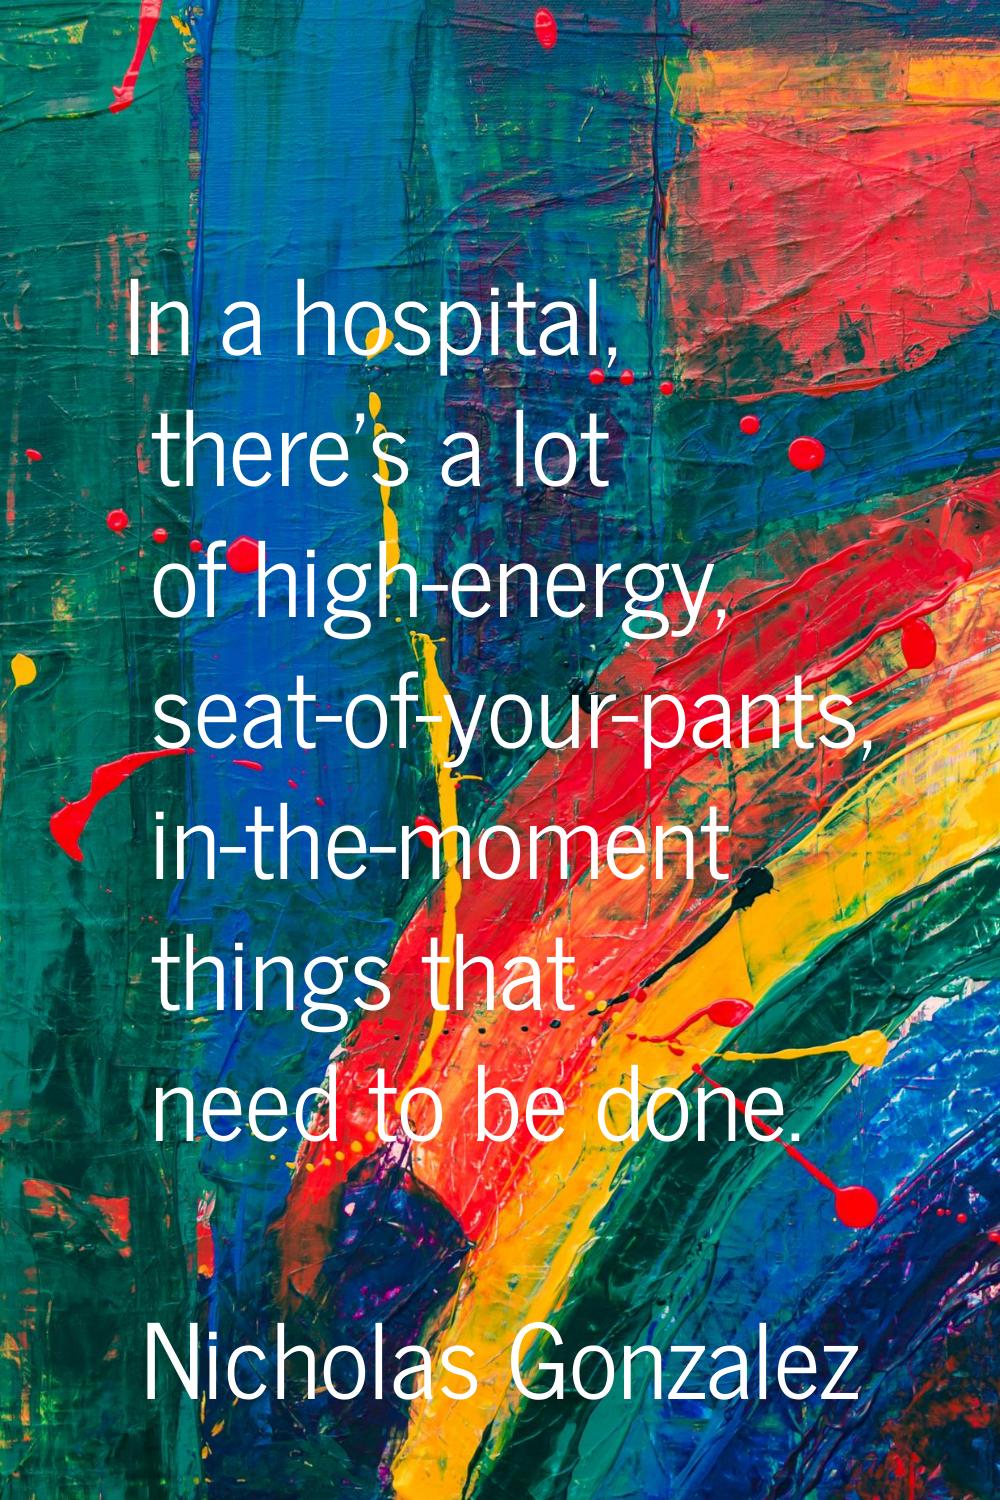 In a hospital, there's a lot of high-energy, seat-of-your-pants, in-the-moment things that need to 